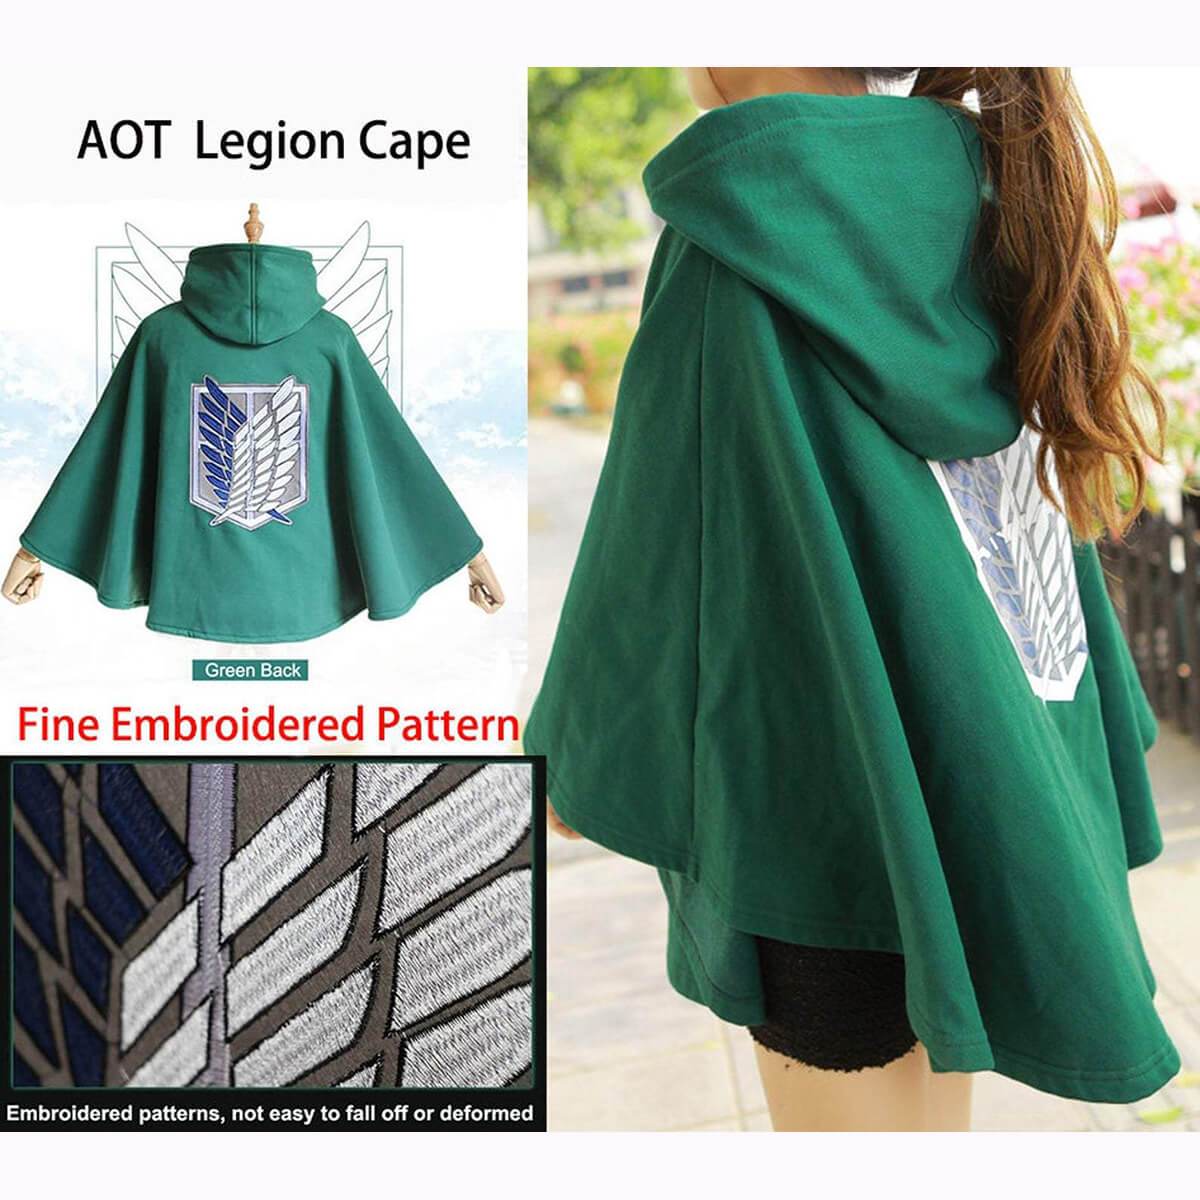 Embroidery Attack on Titan Cloak Hoodie Shingeki no Kyojin Hoodie AOT Cape Scouting Legion Cloak Cool Green Cape Unisex Anime survey corps-Attack on Titan, Featured Collection, Hot Sale - Moo